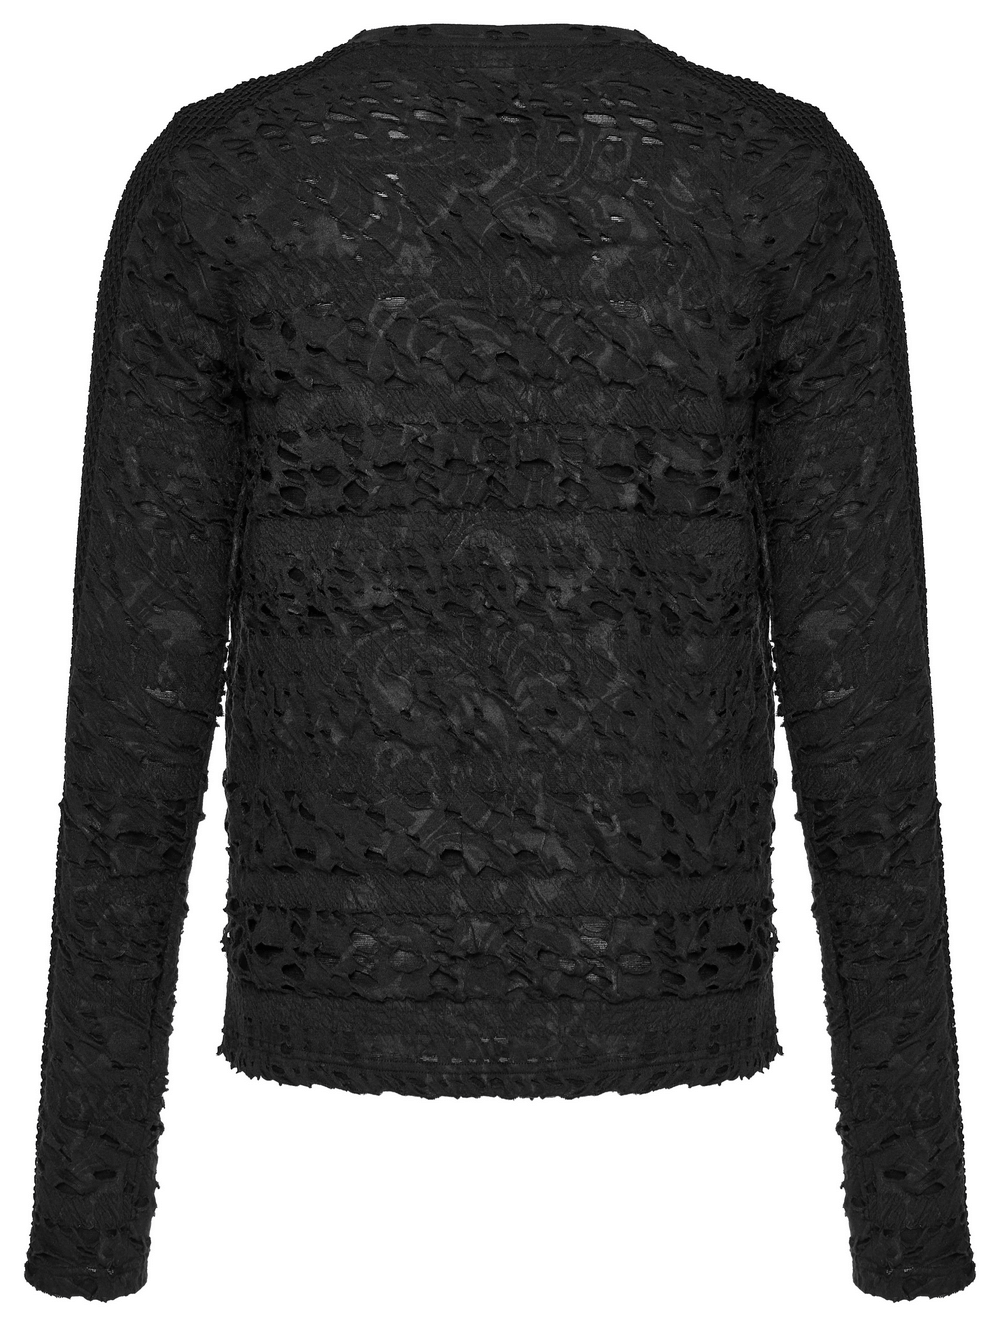 Gothic Men's Decadent Long Sleeves Top With Mesh - HARD'N'HEAVY